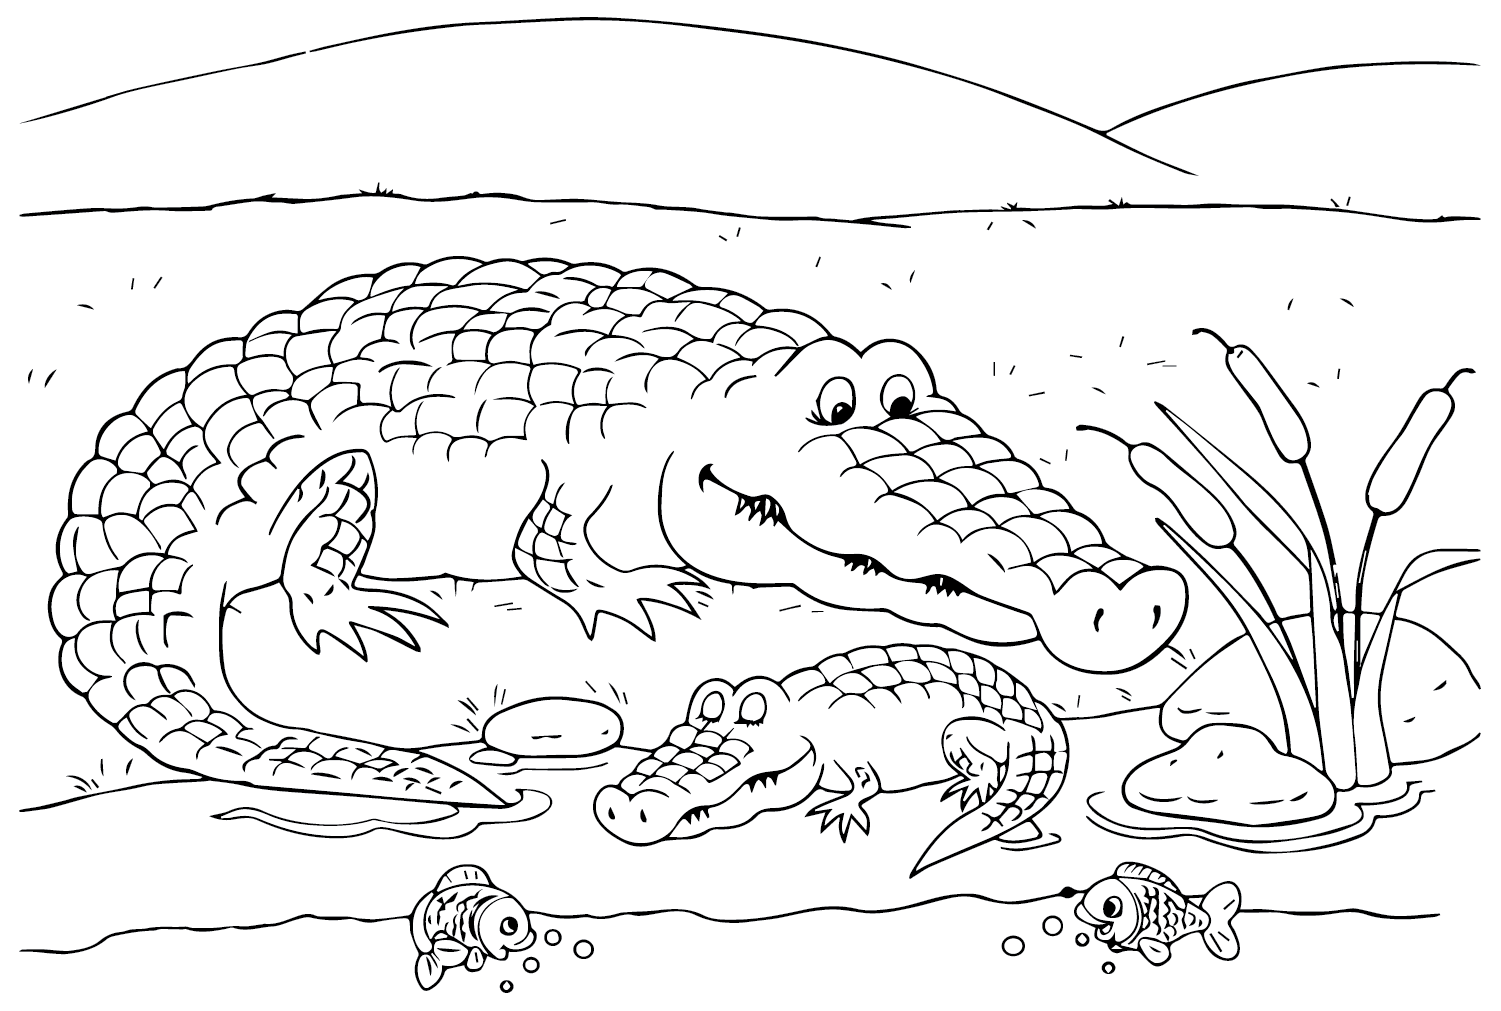 Crocodile Coloring Page to Printable from Crocodile